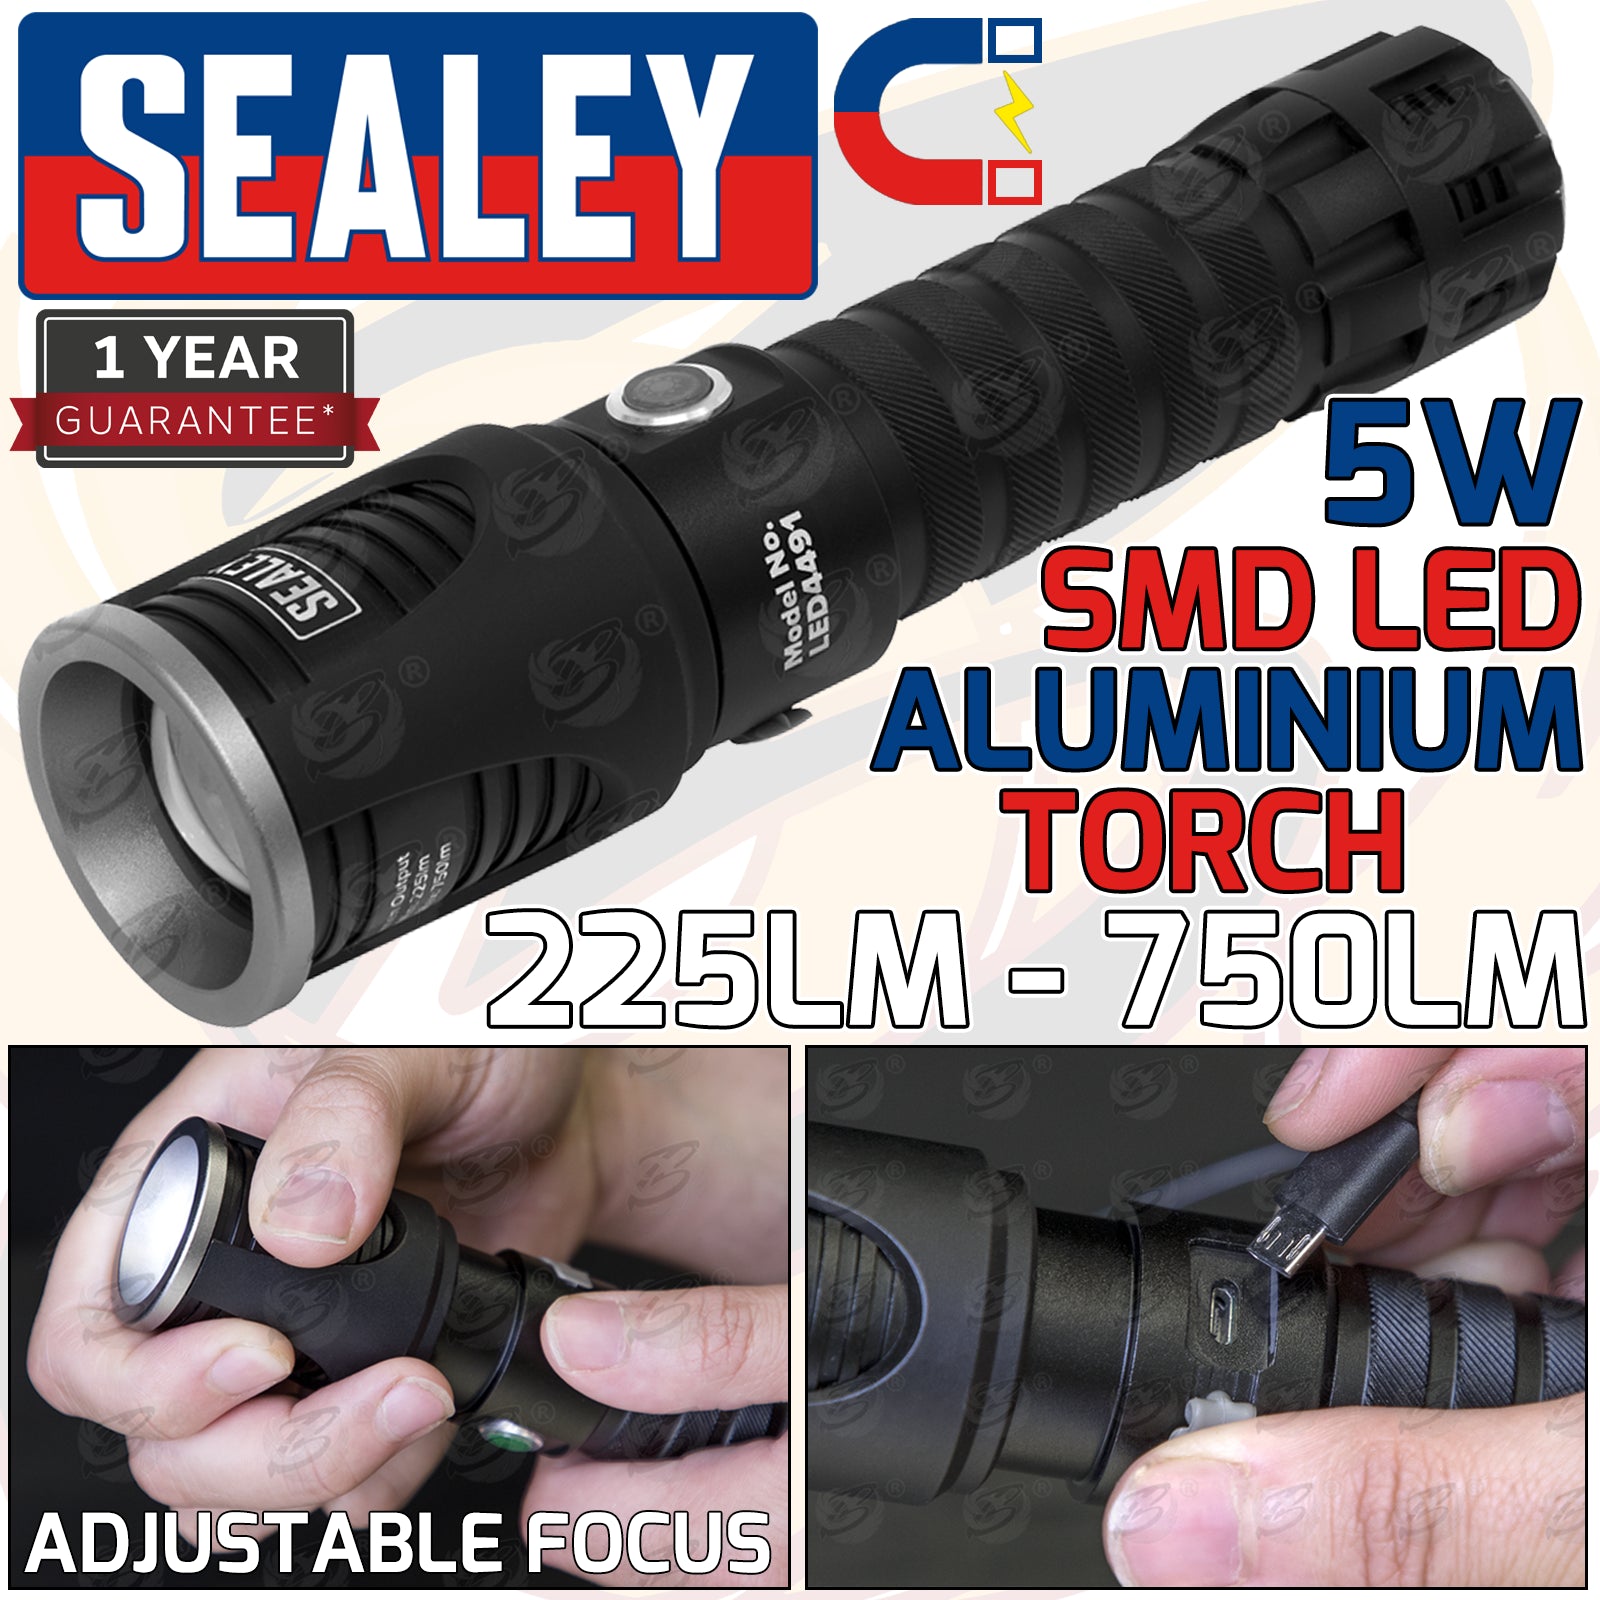 SEALEY RECHARGEABLE LI - ION SMD LED TORCH 5W 225LM - 750LM